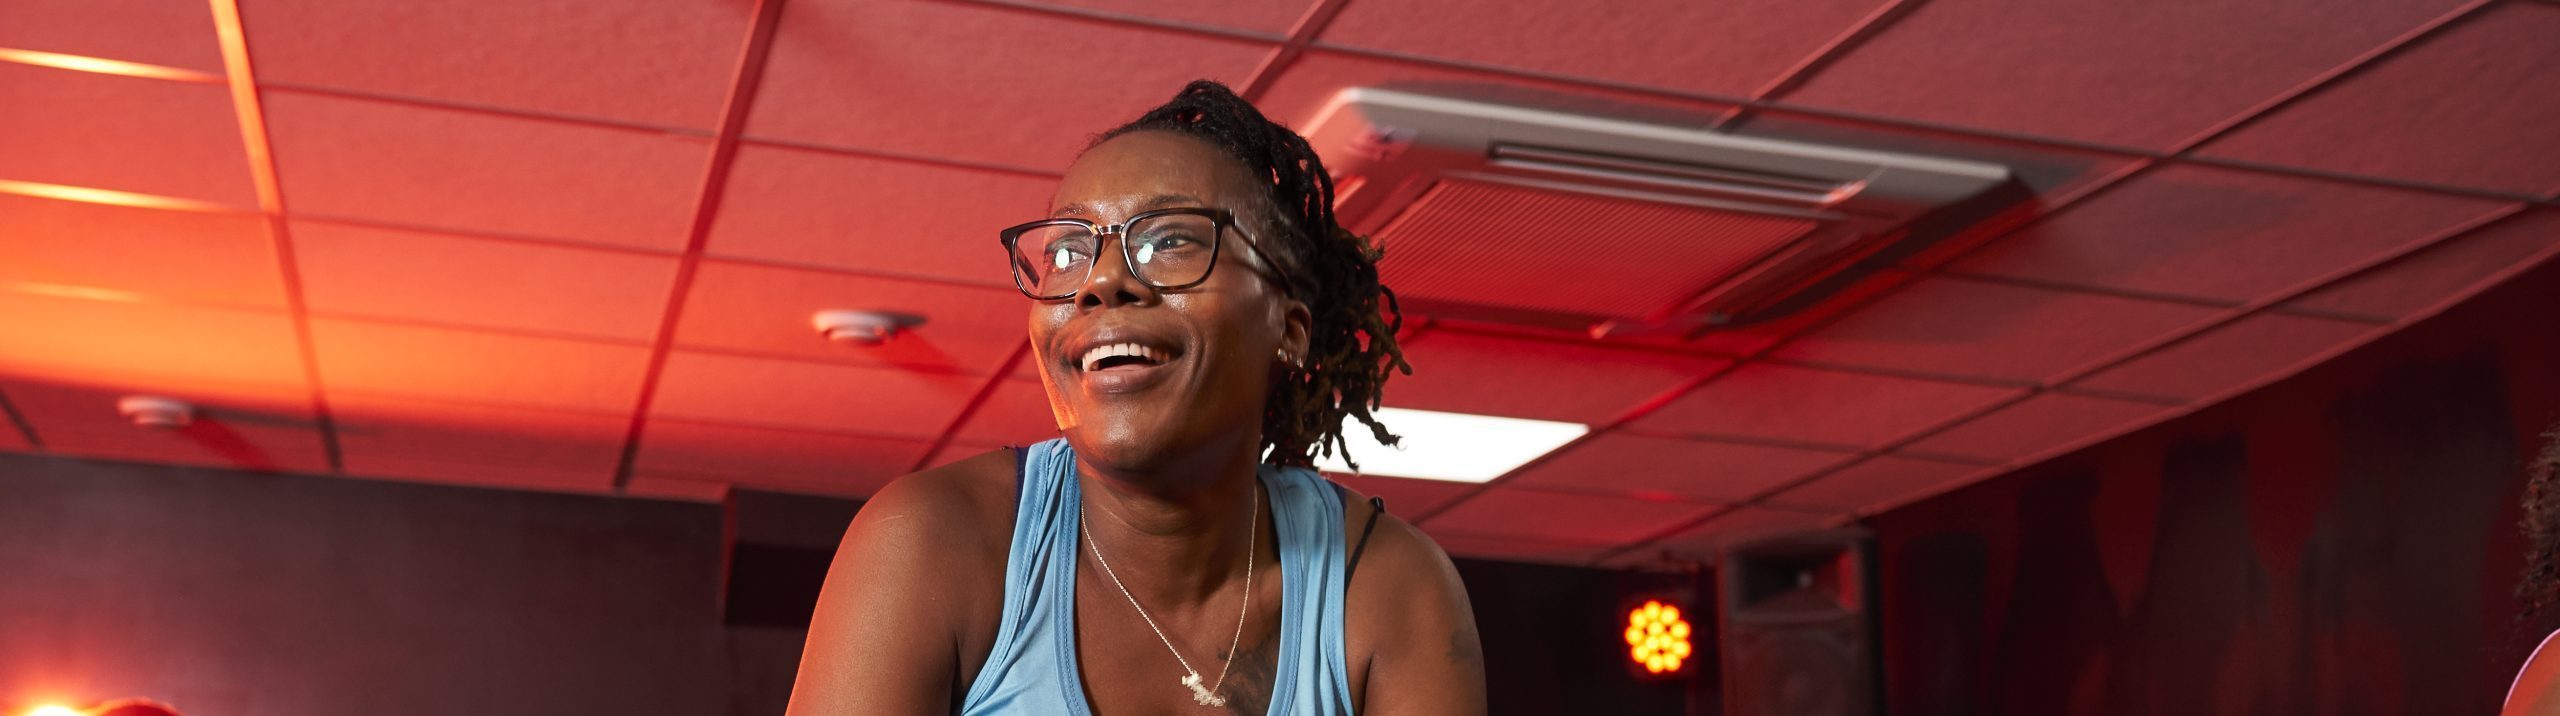 A black woman with braids in a spin cycling class